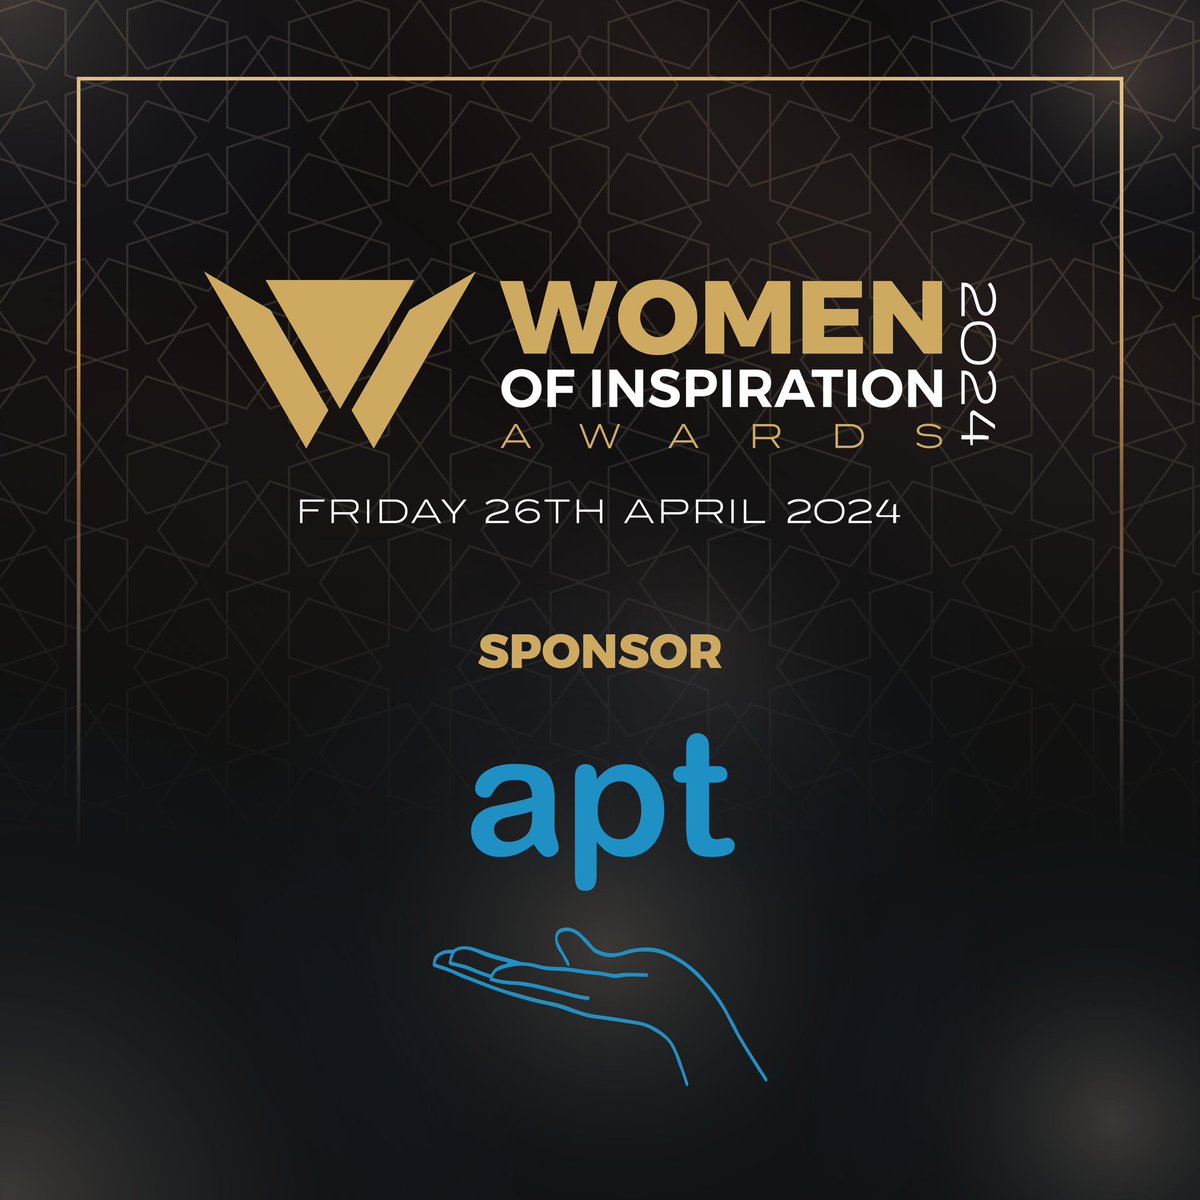 The Women of Inspiration Awards are delighted to announce our sponsor, @APT We are grateful for their support in empowering and celebrating inspiring women. sponsor and be part of this incredible event, email us at awards@empoweringeducation.co.uk